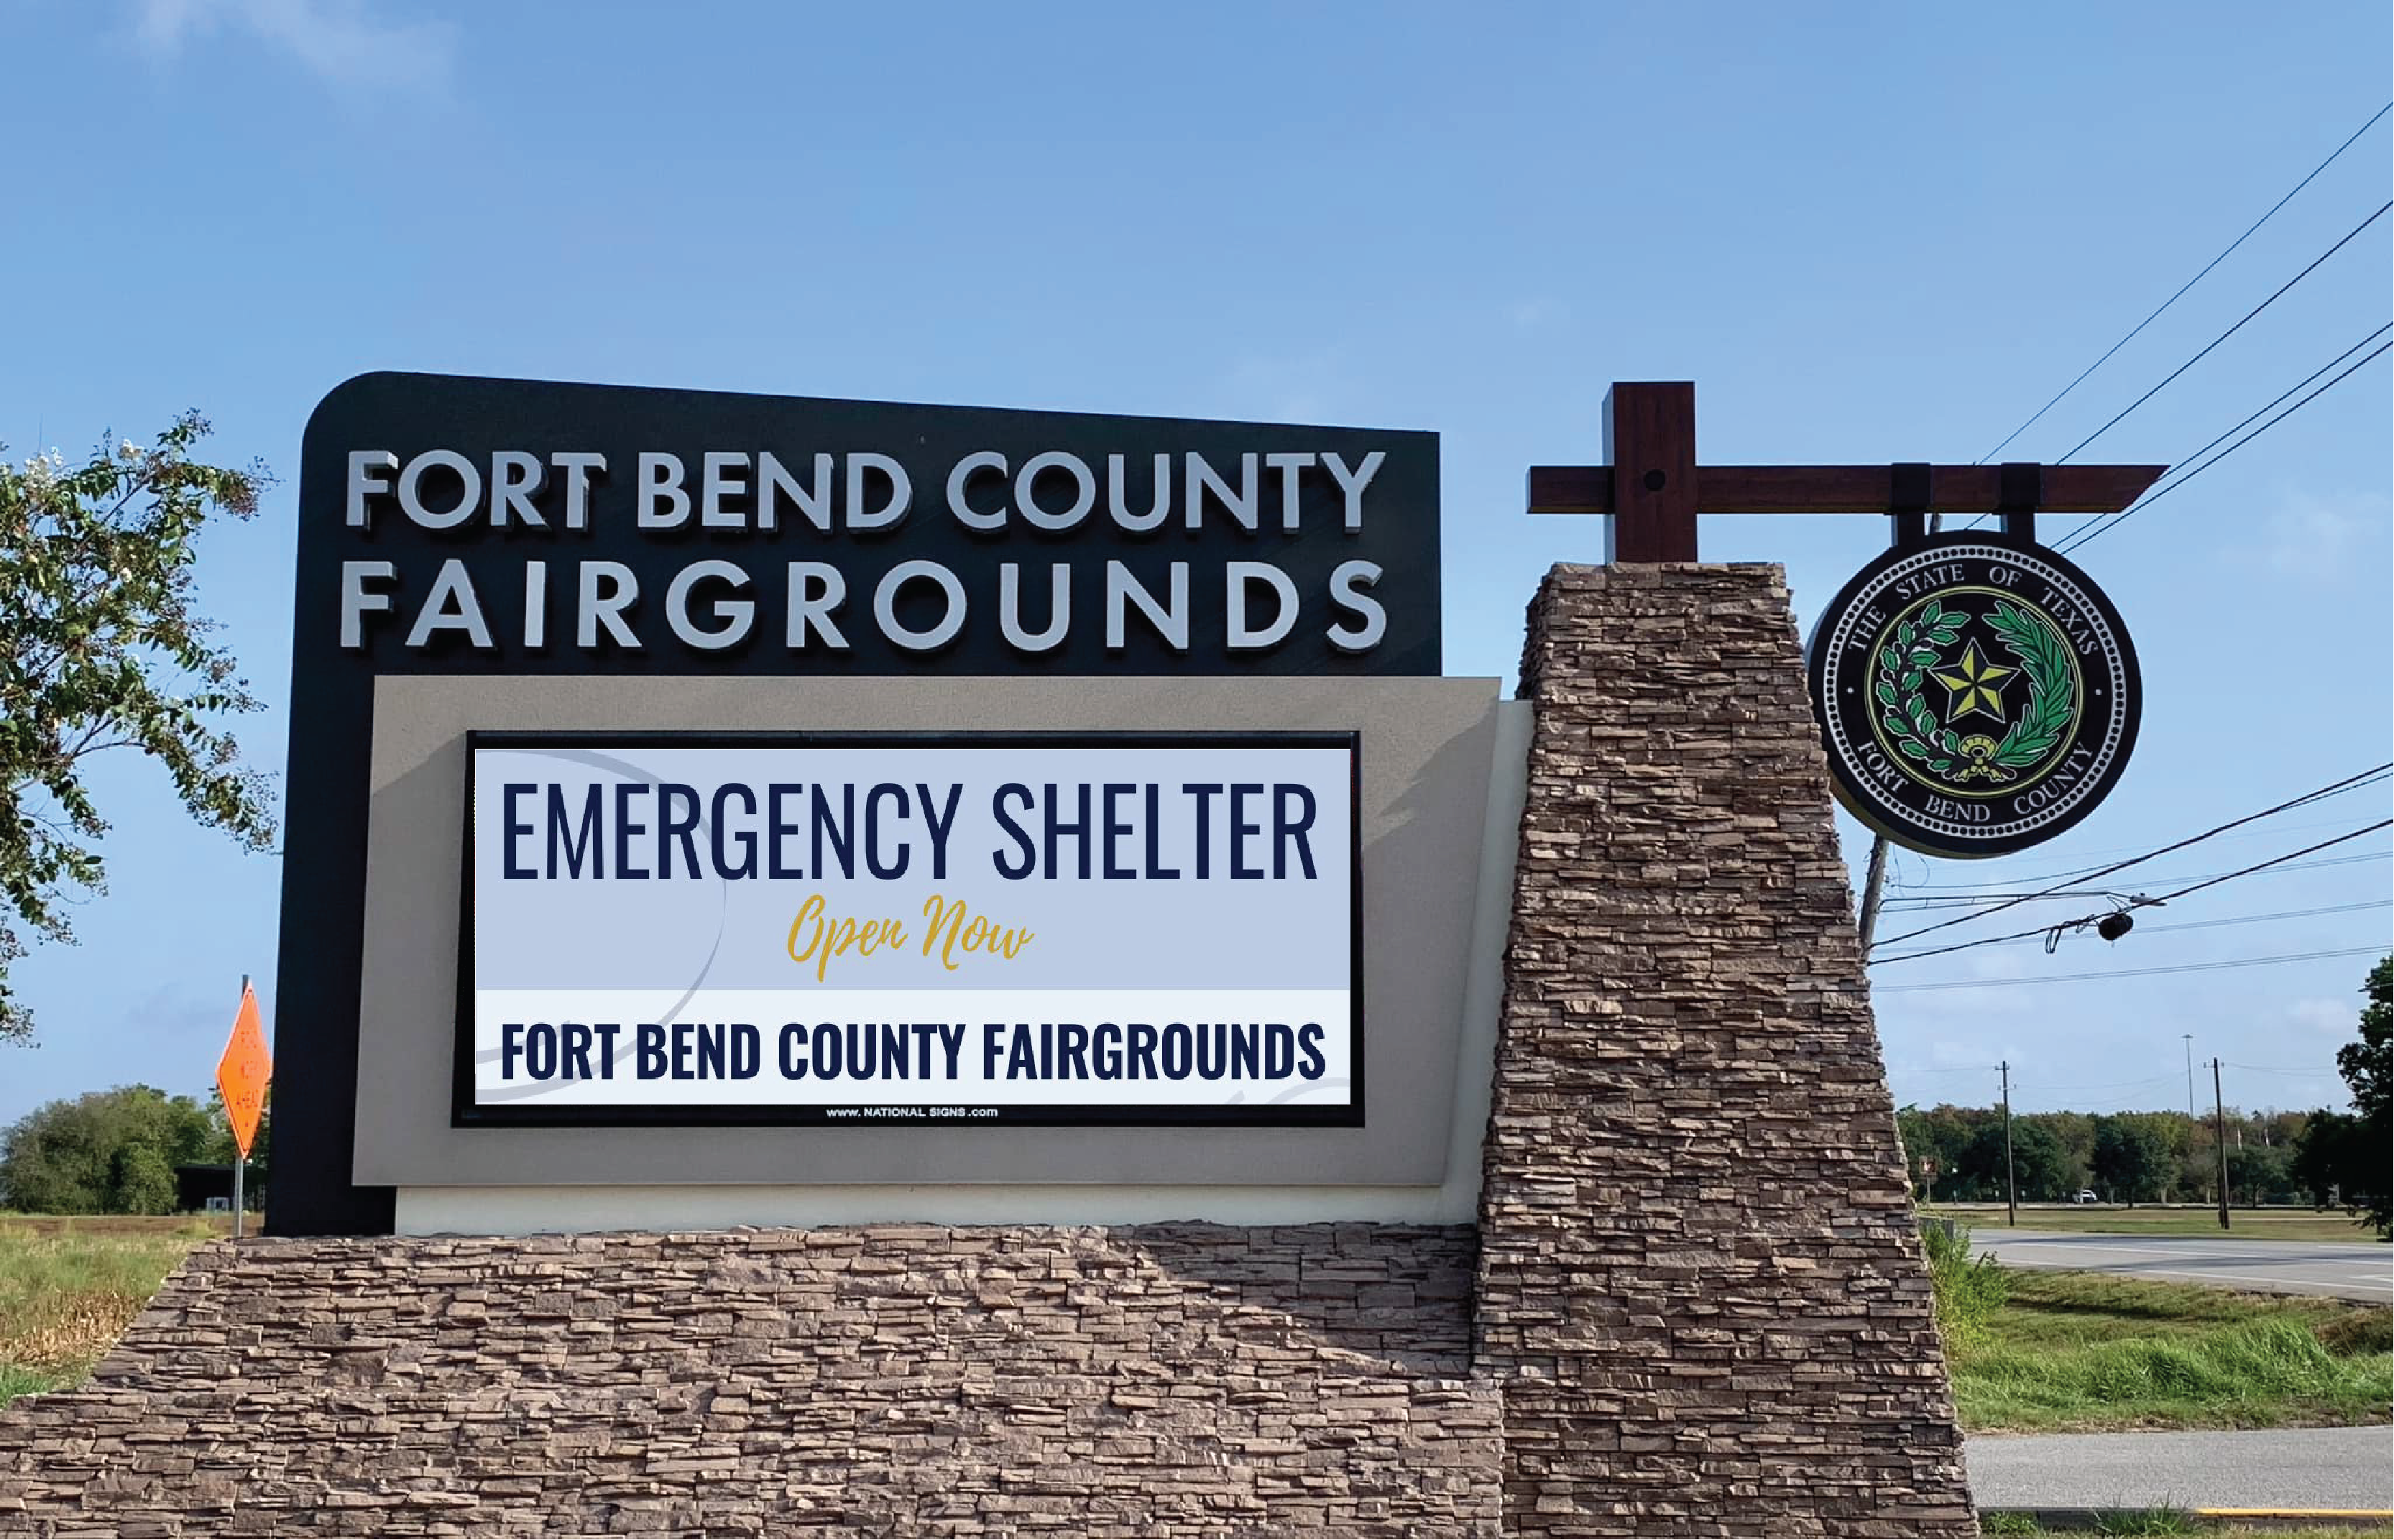 Fort Bend County Officials Open Fort Bend County Fairgrounds as Emergency Shelter in Hurricane Beryl Aftermath